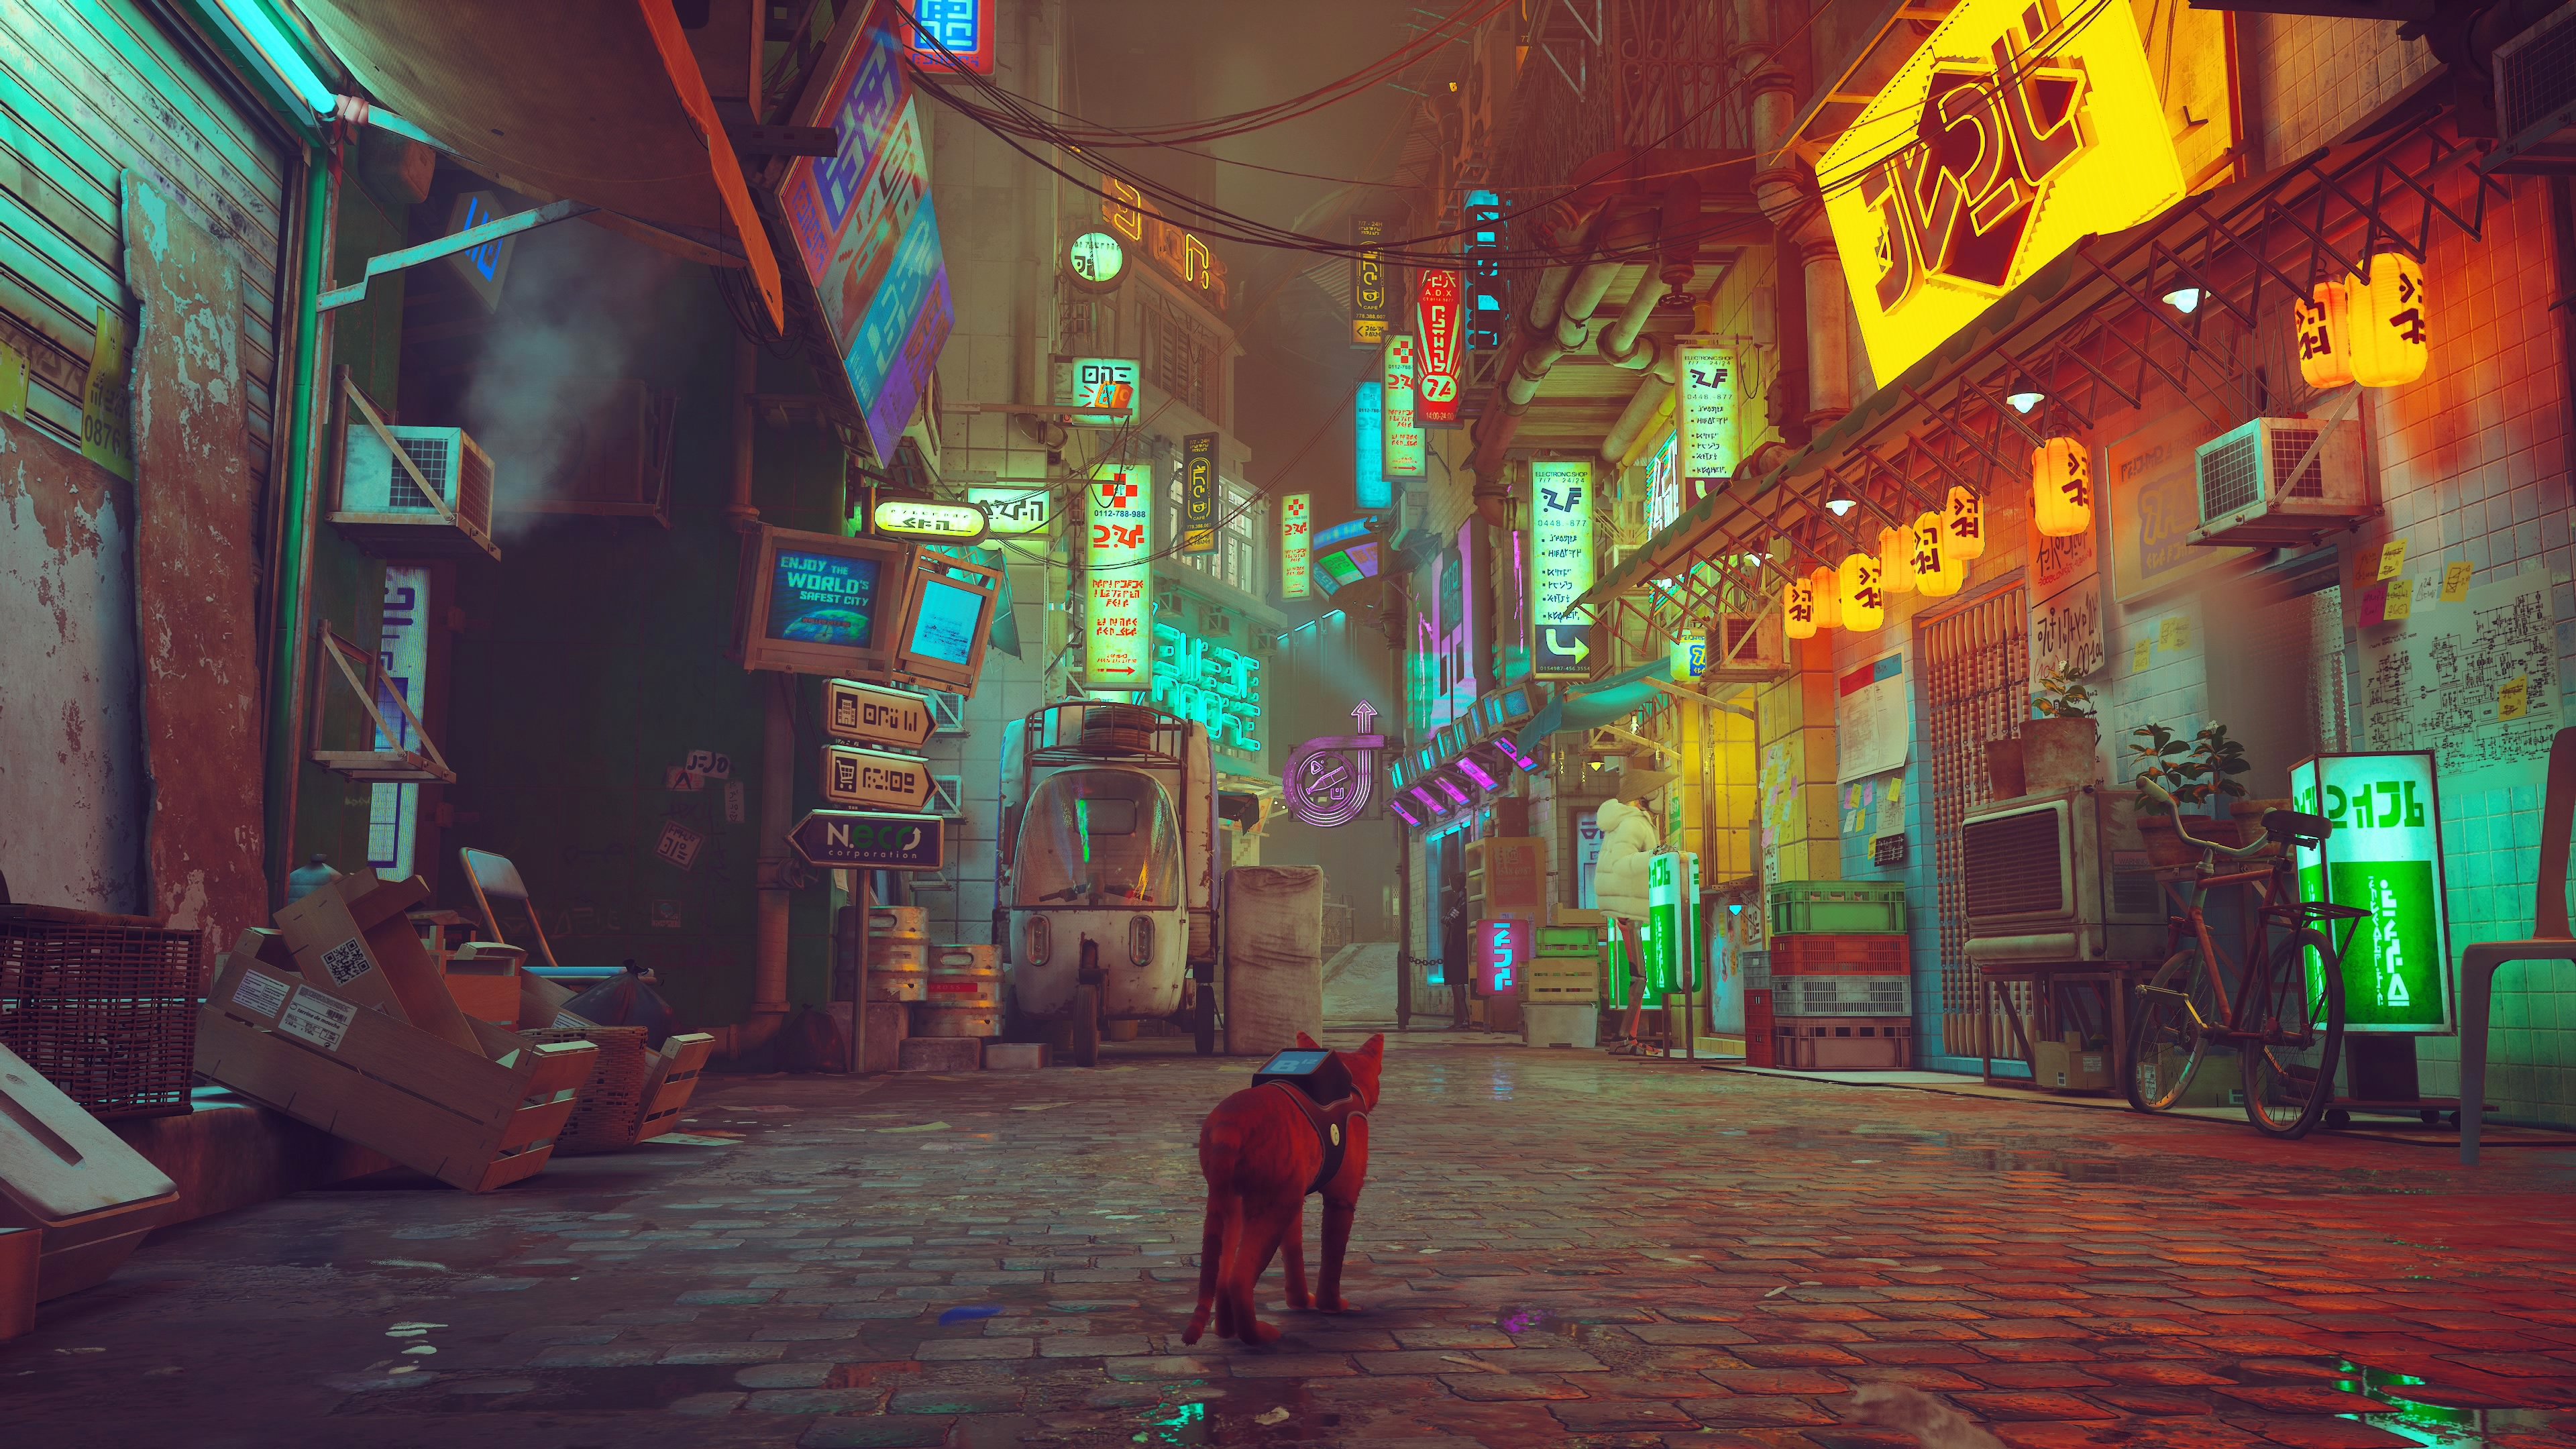 Stray is PlayStation Plus' most popular game of 2022